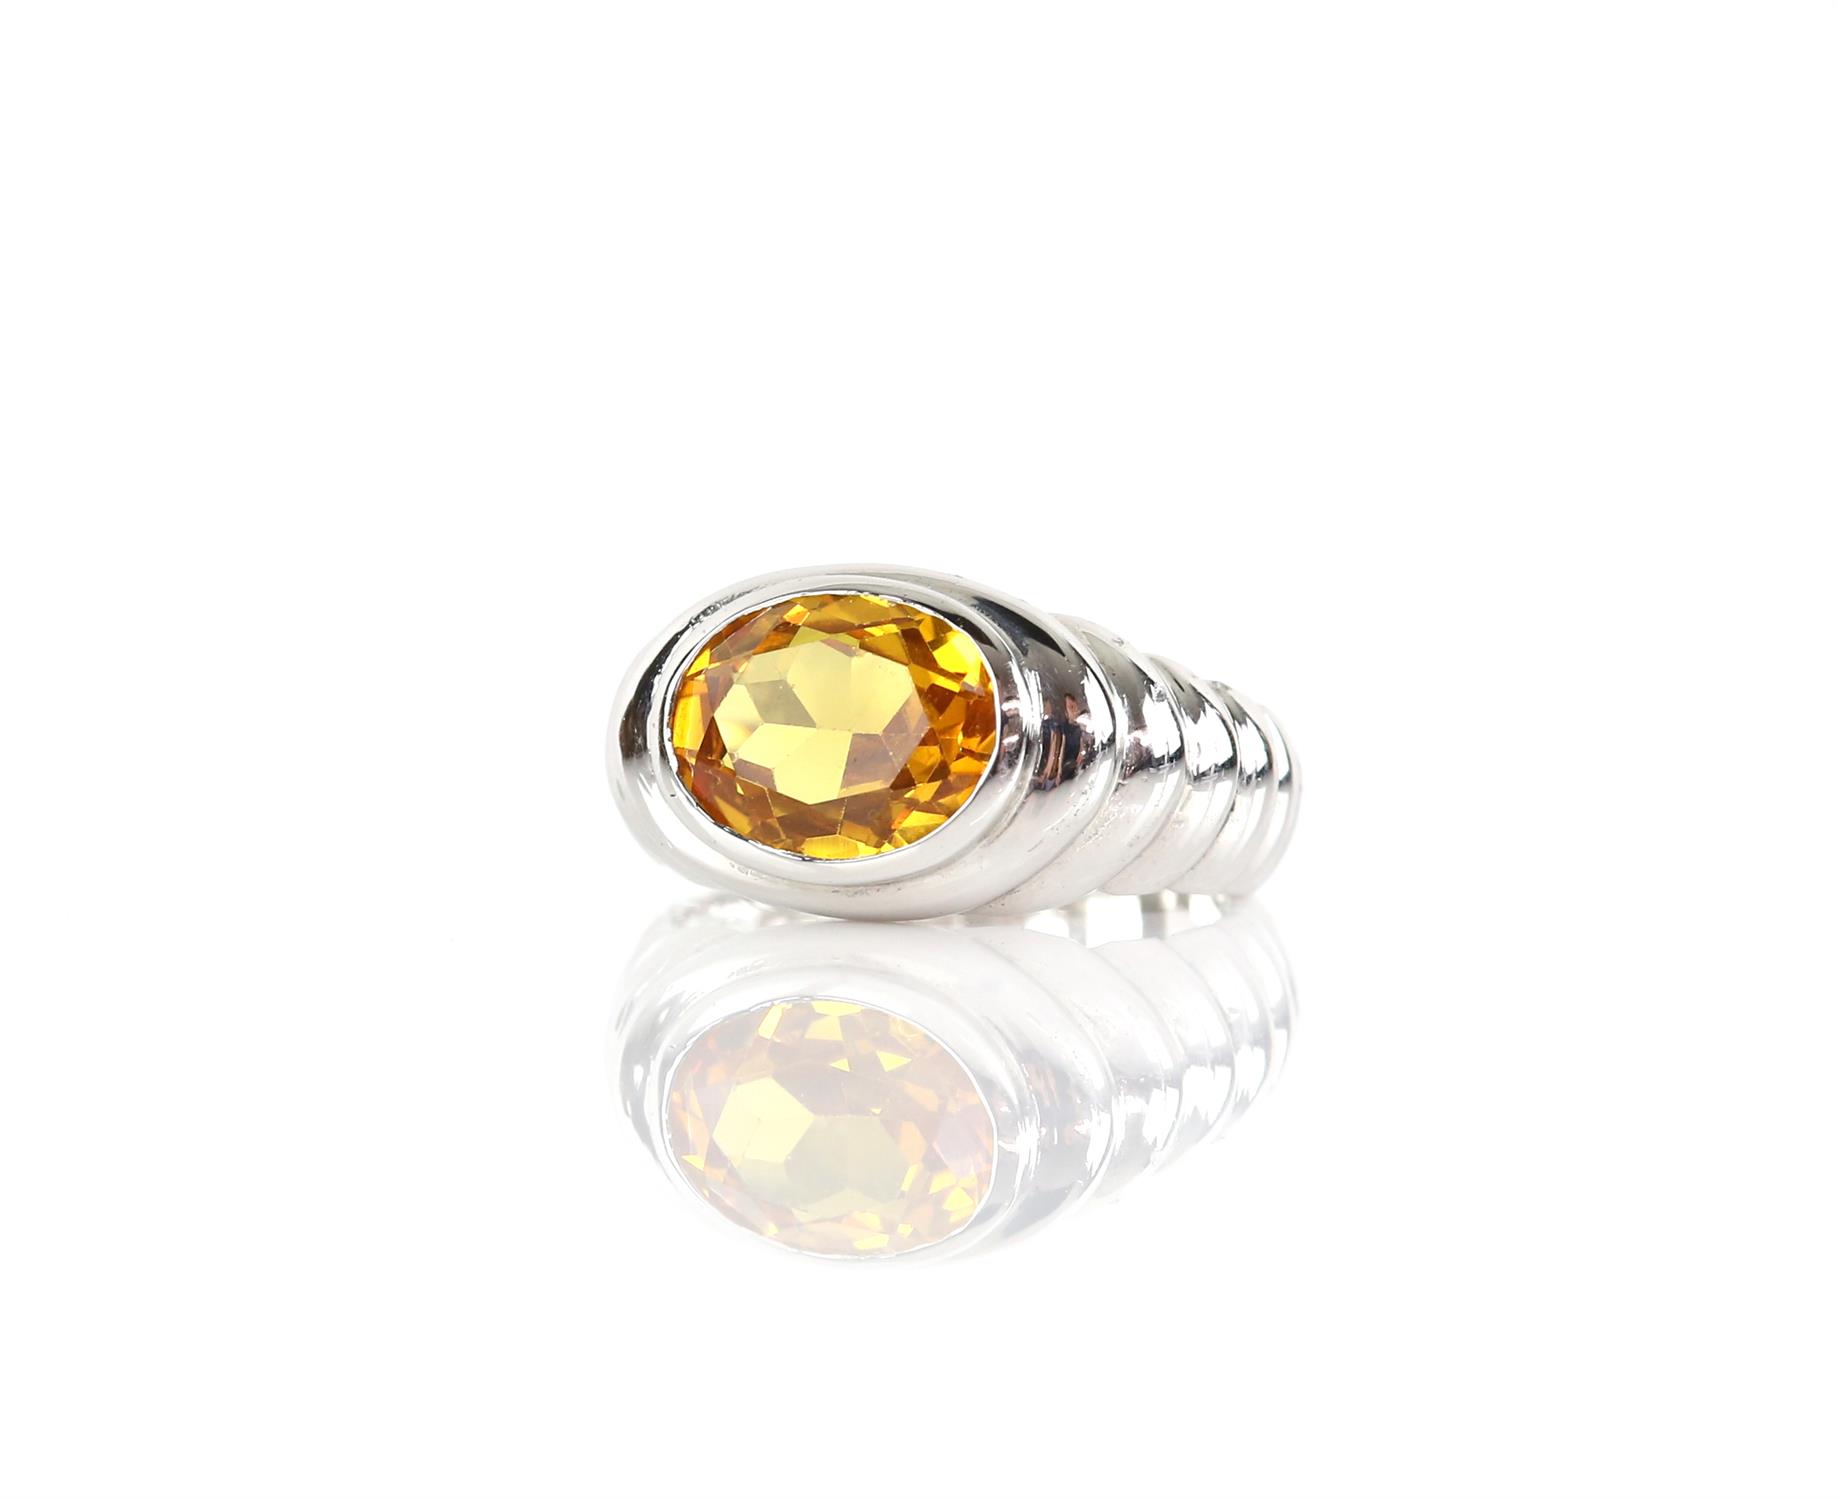 Modern synthetic yellow sapphire ring, set with an oval cut yellow synthetic sapphire,